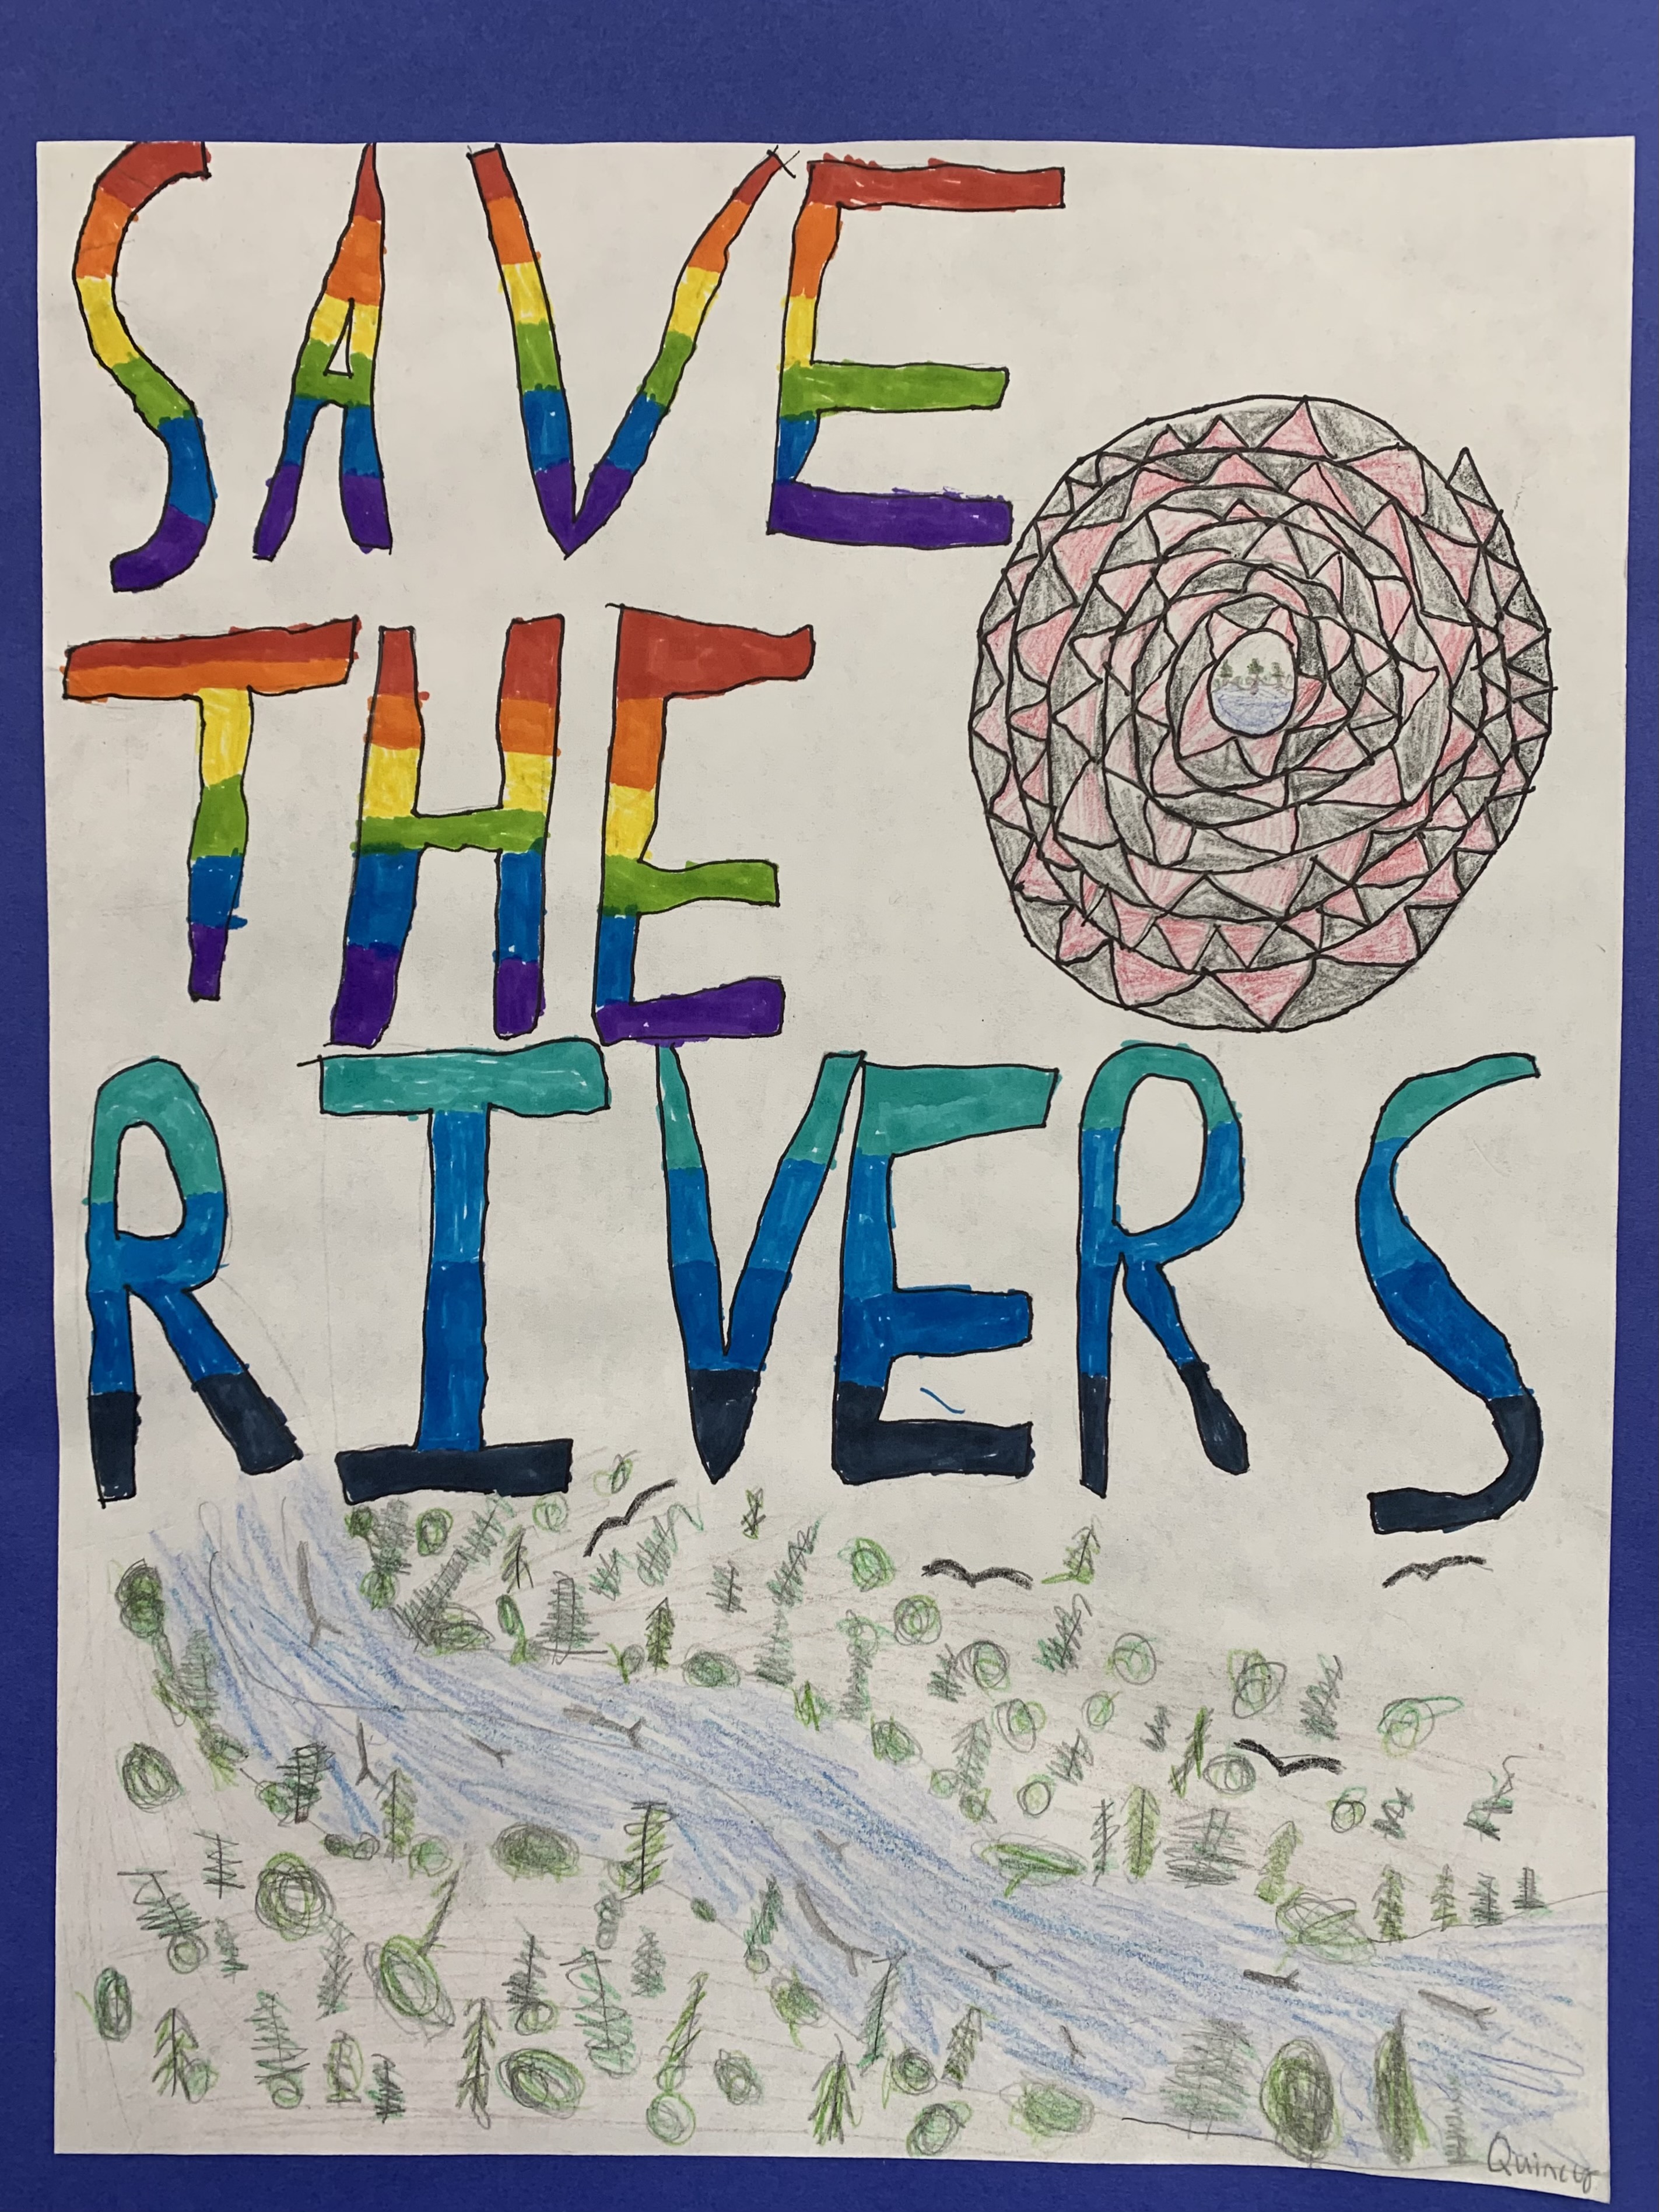 Save the Rivers - by Quincy Kelly